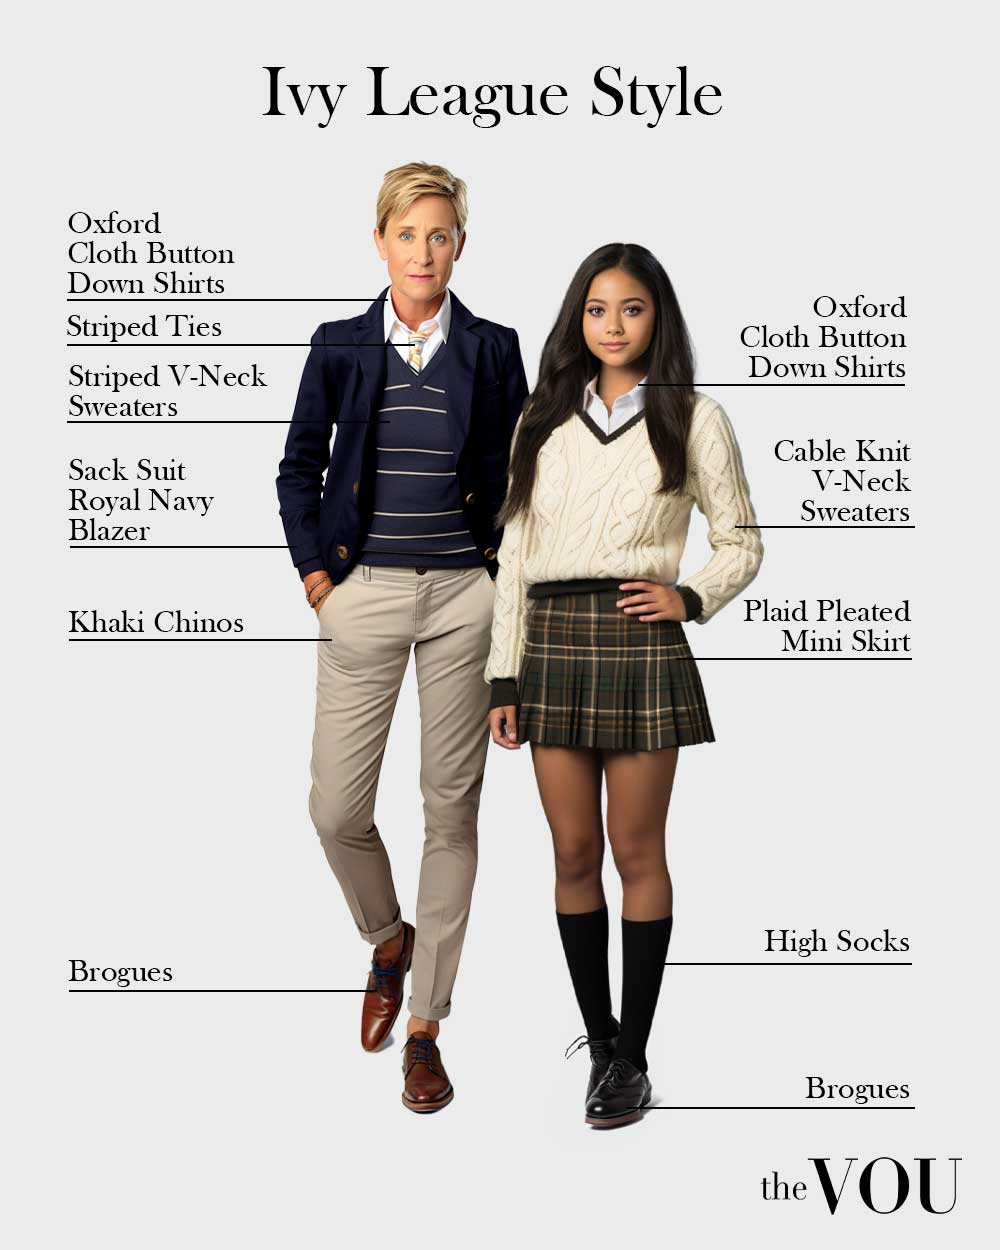 How to Dress Ivy League